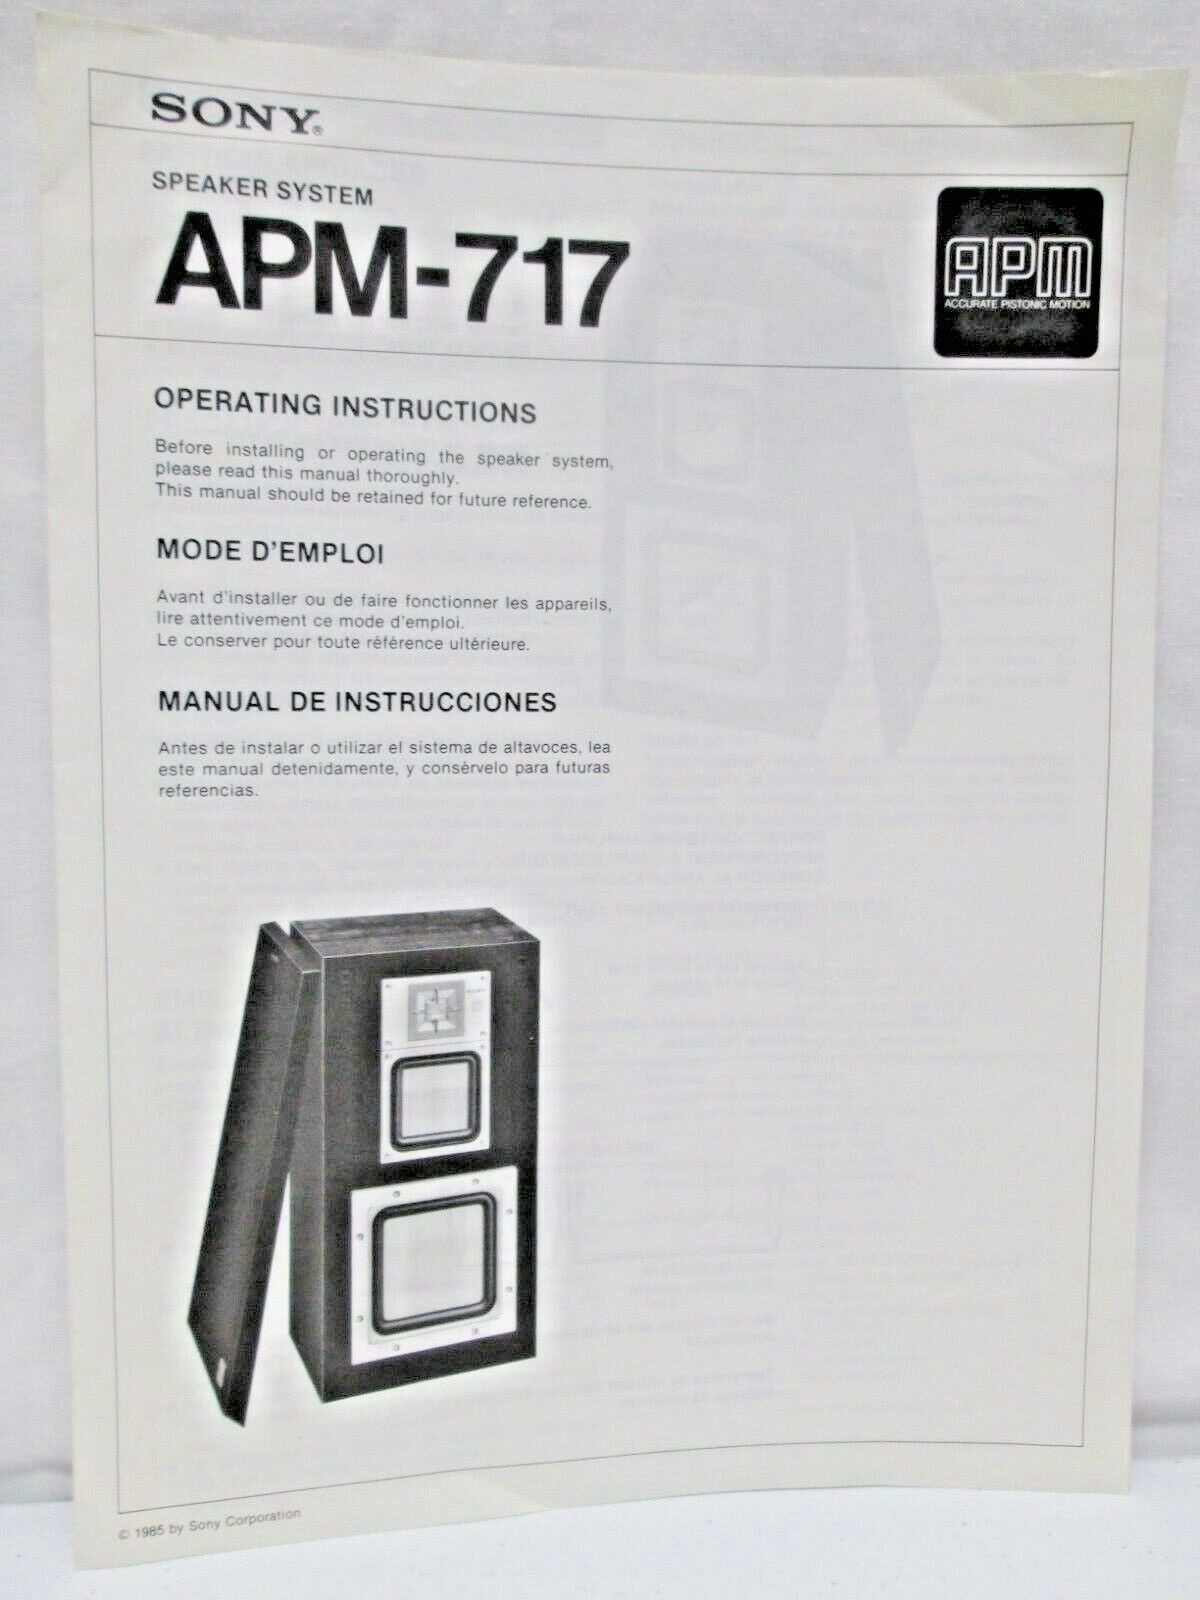 Sony Speaker System APM-717 Operating Instructions Reference Manual Specs 1985